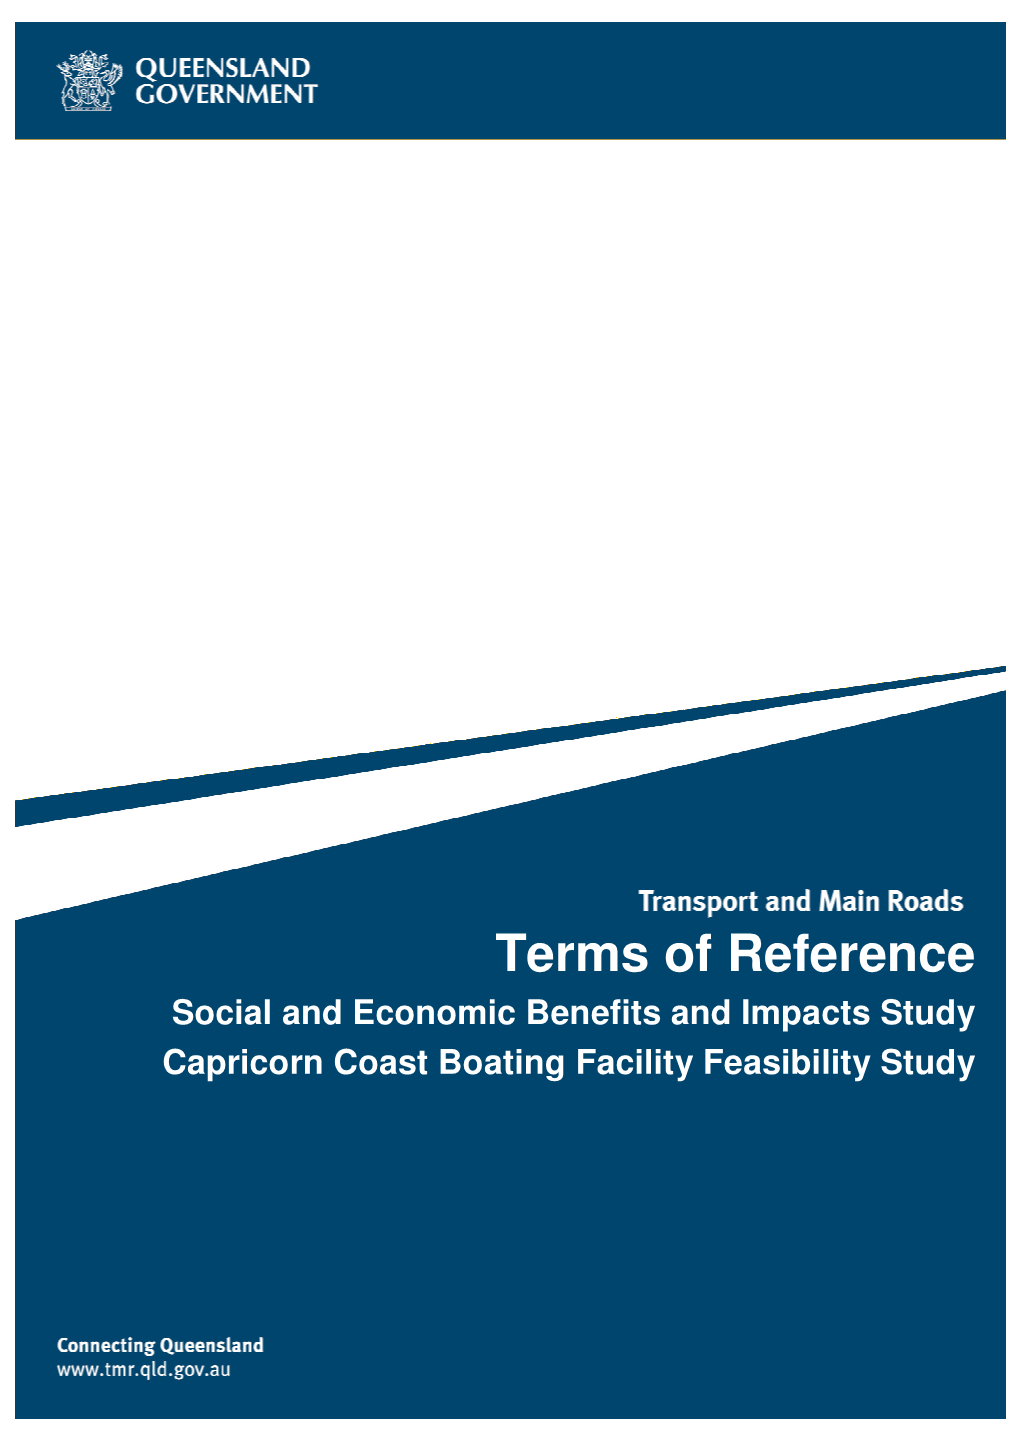 Terms of Reference: Social and Economic Benefits and Impacts Study